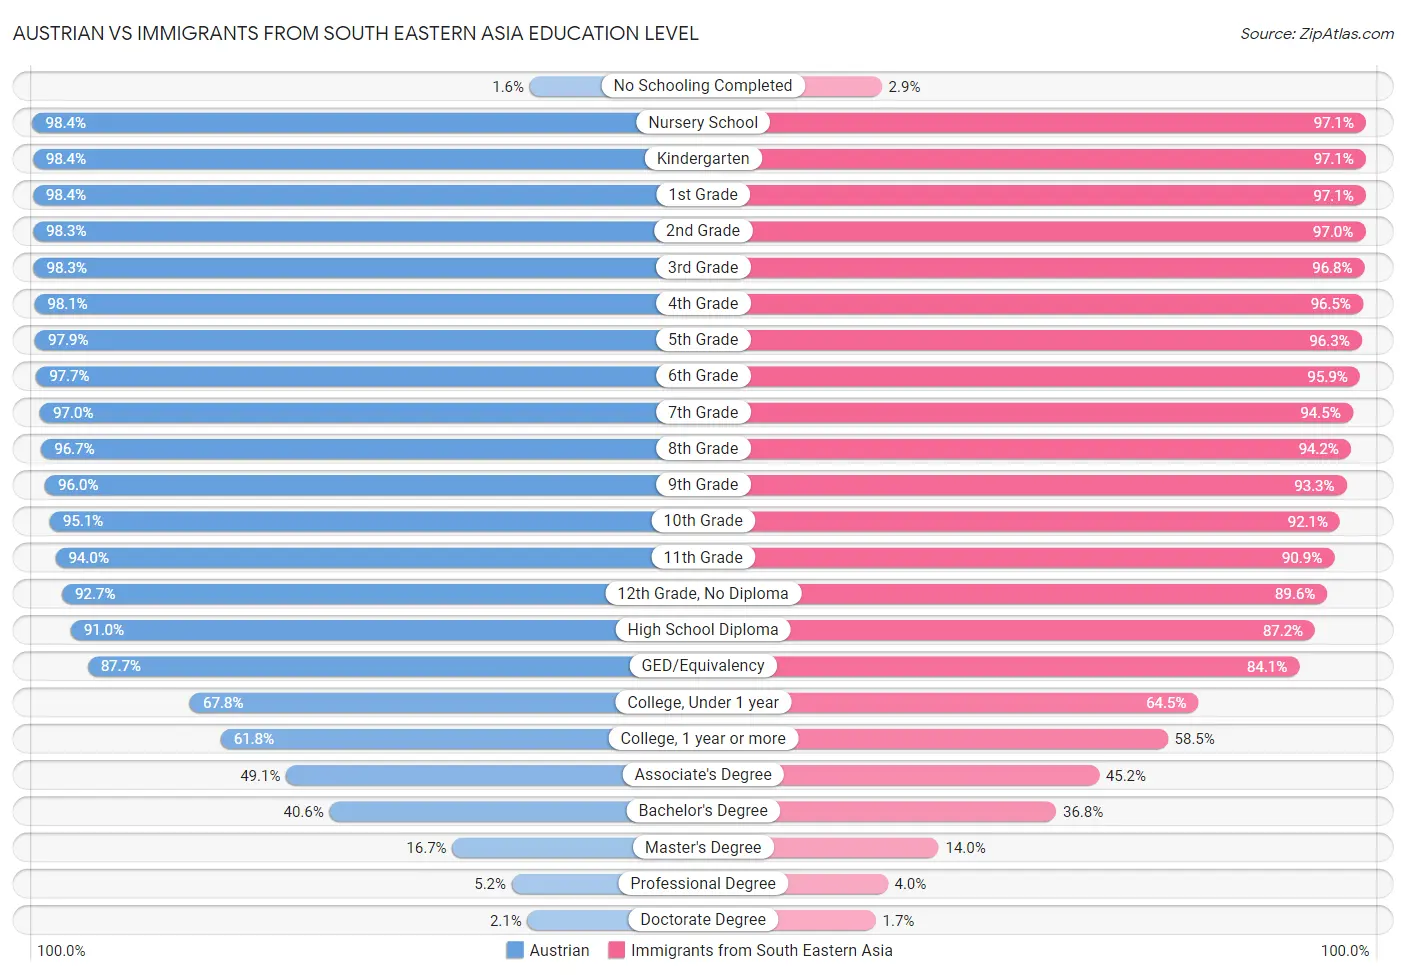 Austrian vs Immigrants from South Eastern Asia Education Level